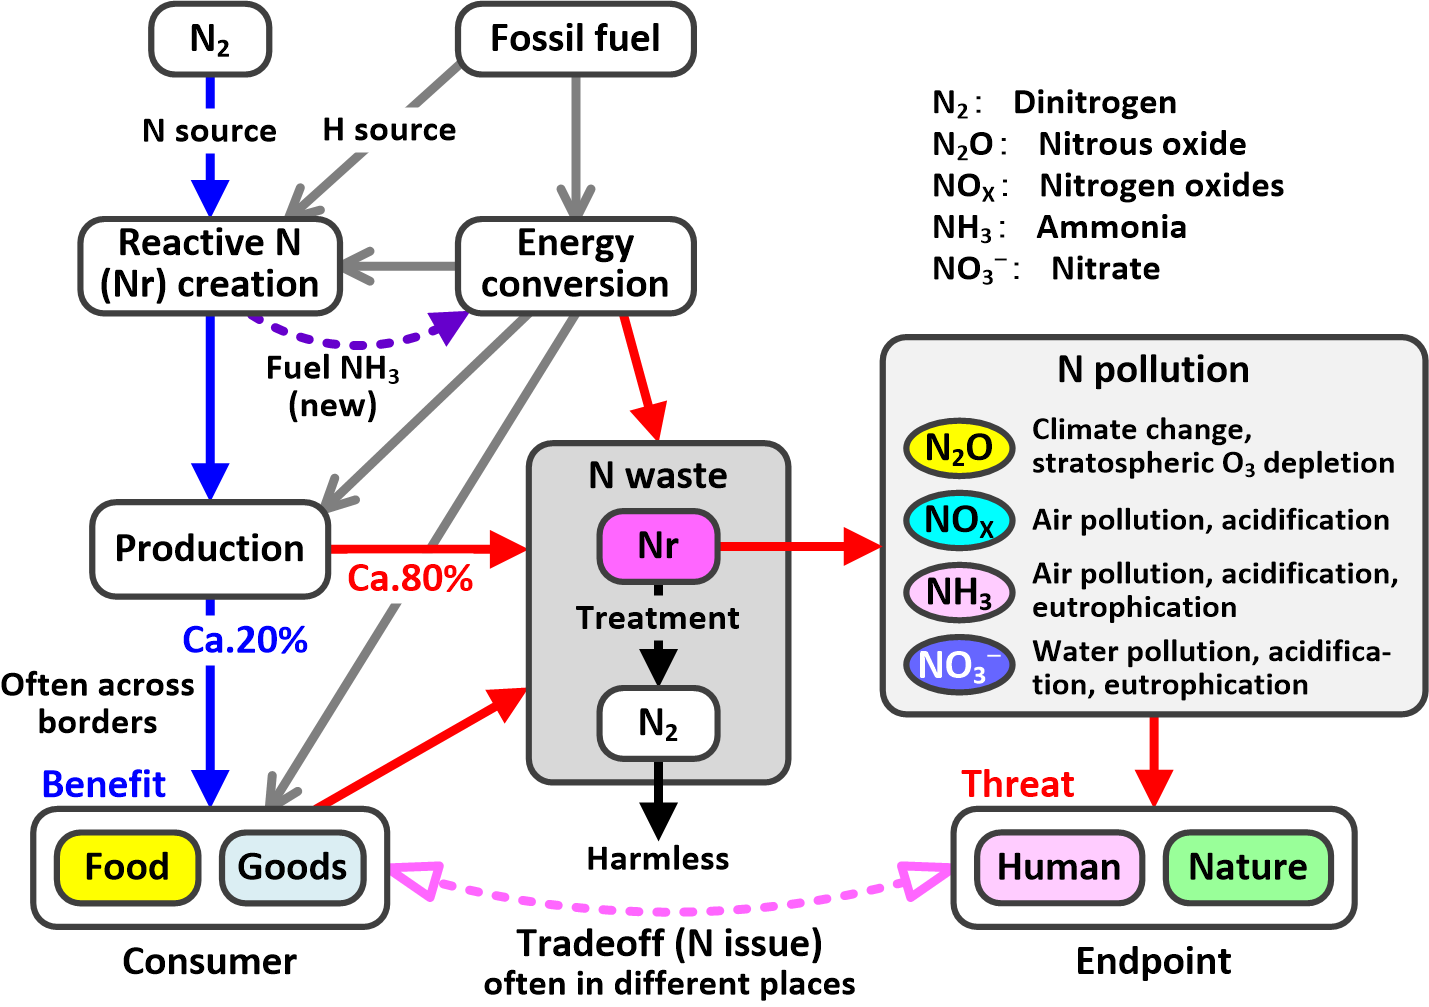 The nitrogen issue is a tradeoff between the benefits of nitrogen use and the threats due to nitrogen pollution.